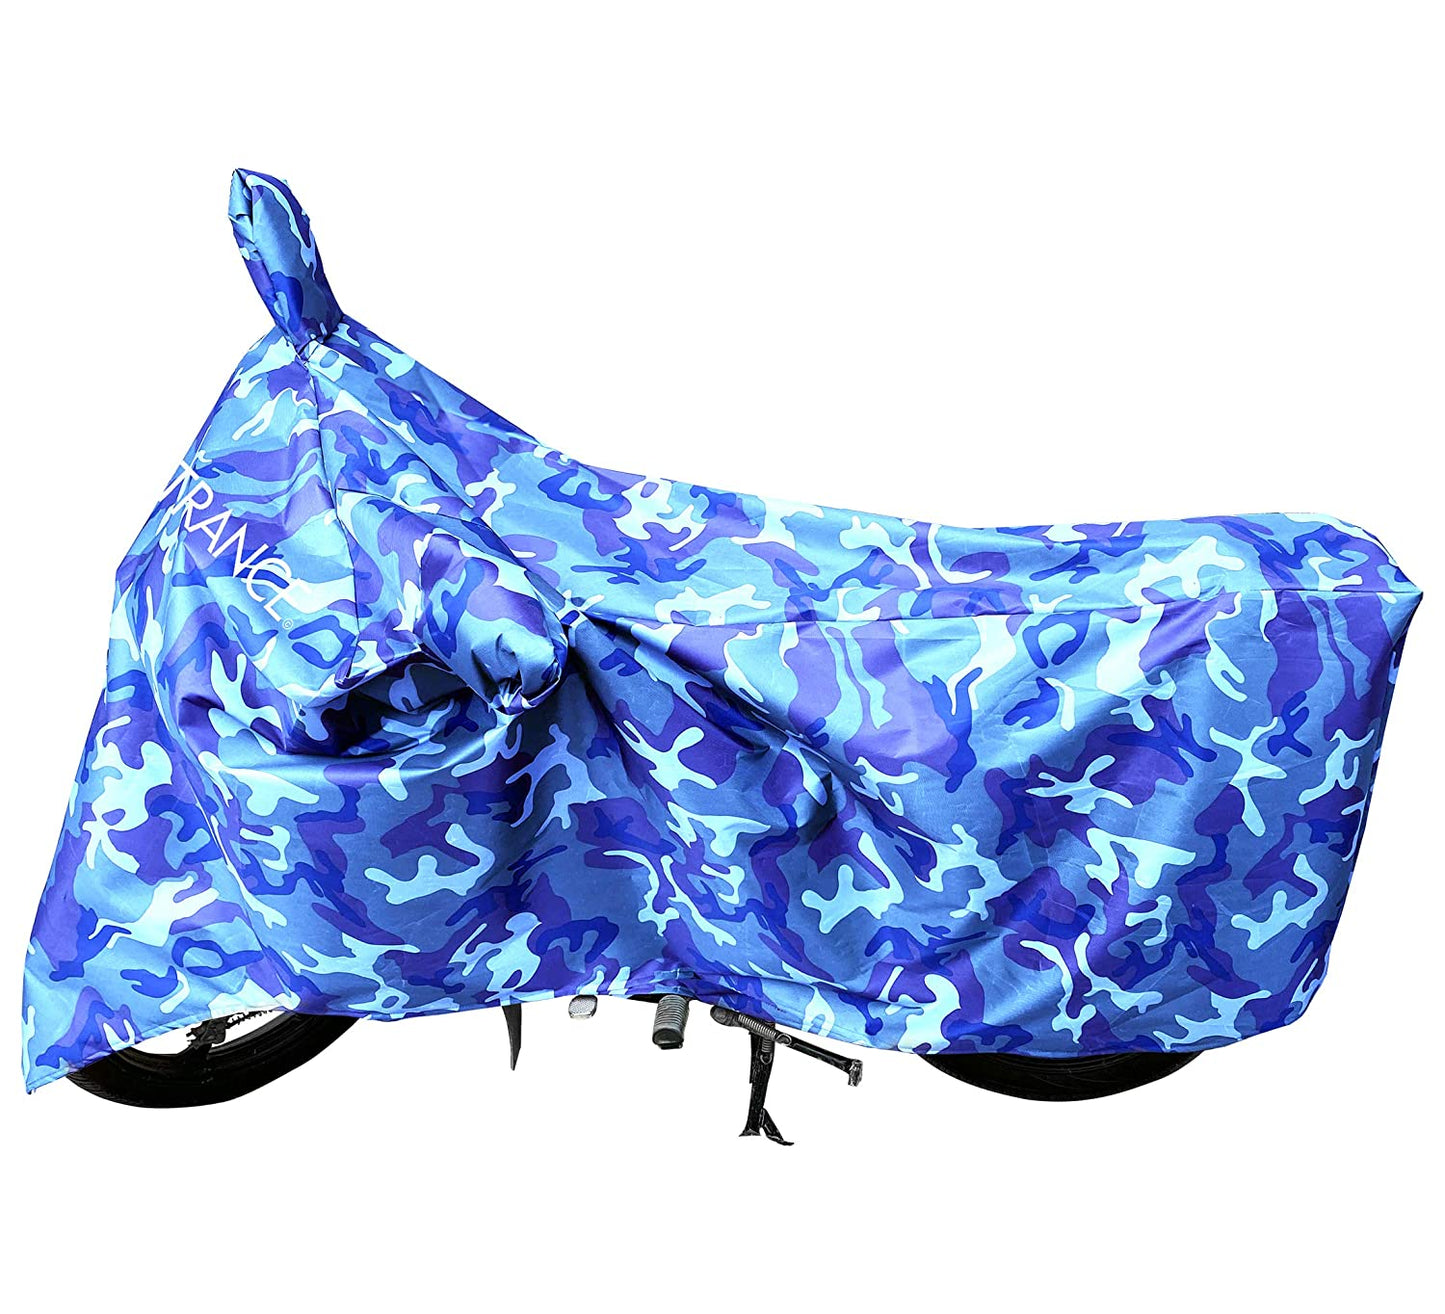 MotoTrance Jungle Bike Body Covers For Bajaj Discover 125 - Interlock-Stitched Waterproof and Heat Resistant with Mirror Pockets